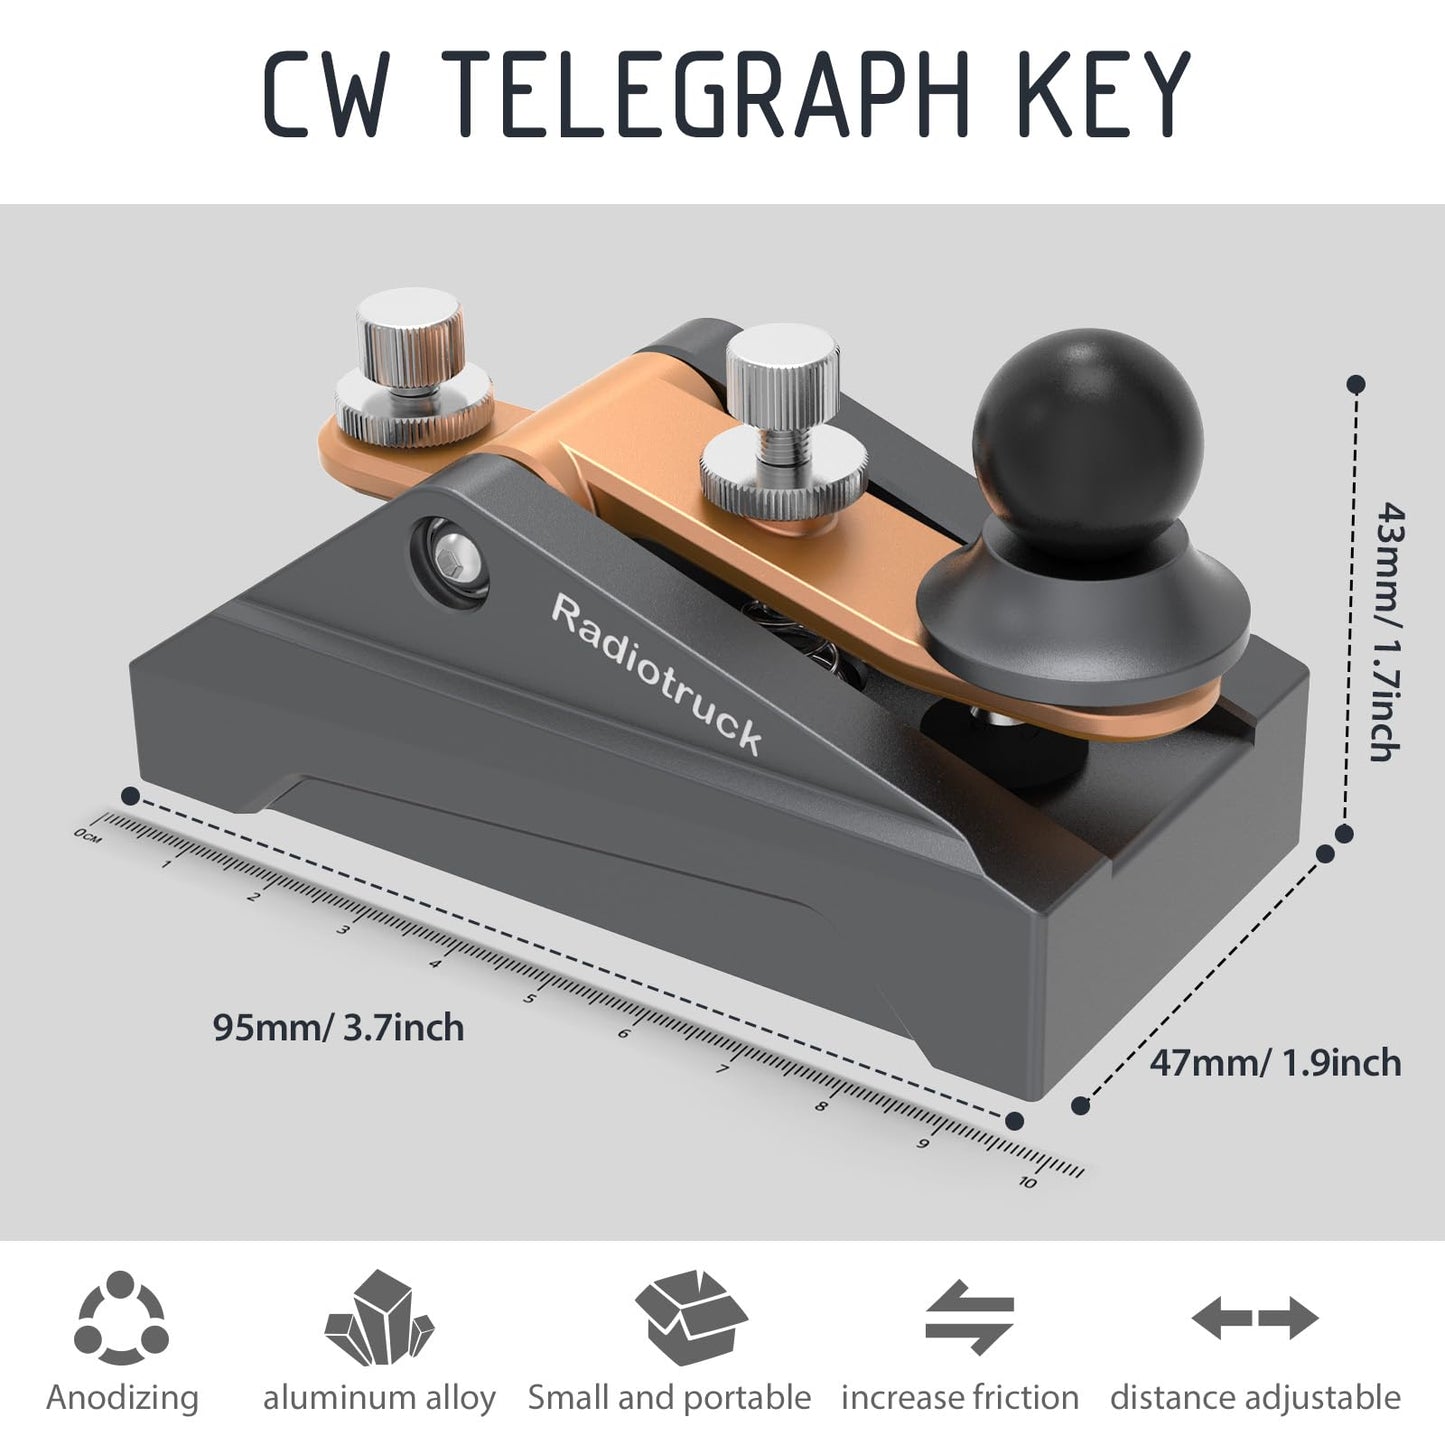 CW Morse Code Keys: Precision and Comfort Exquisite PC board with 3.5mm stereo receptacle. Dual magnetic return force (400g-1000g). Adjustable Dit & DAH paddle distances. Non-slip pads and weighted base for stability.Ideal for radio enthusiasts, CW Morse code keys offer enhanced performance and comfort.